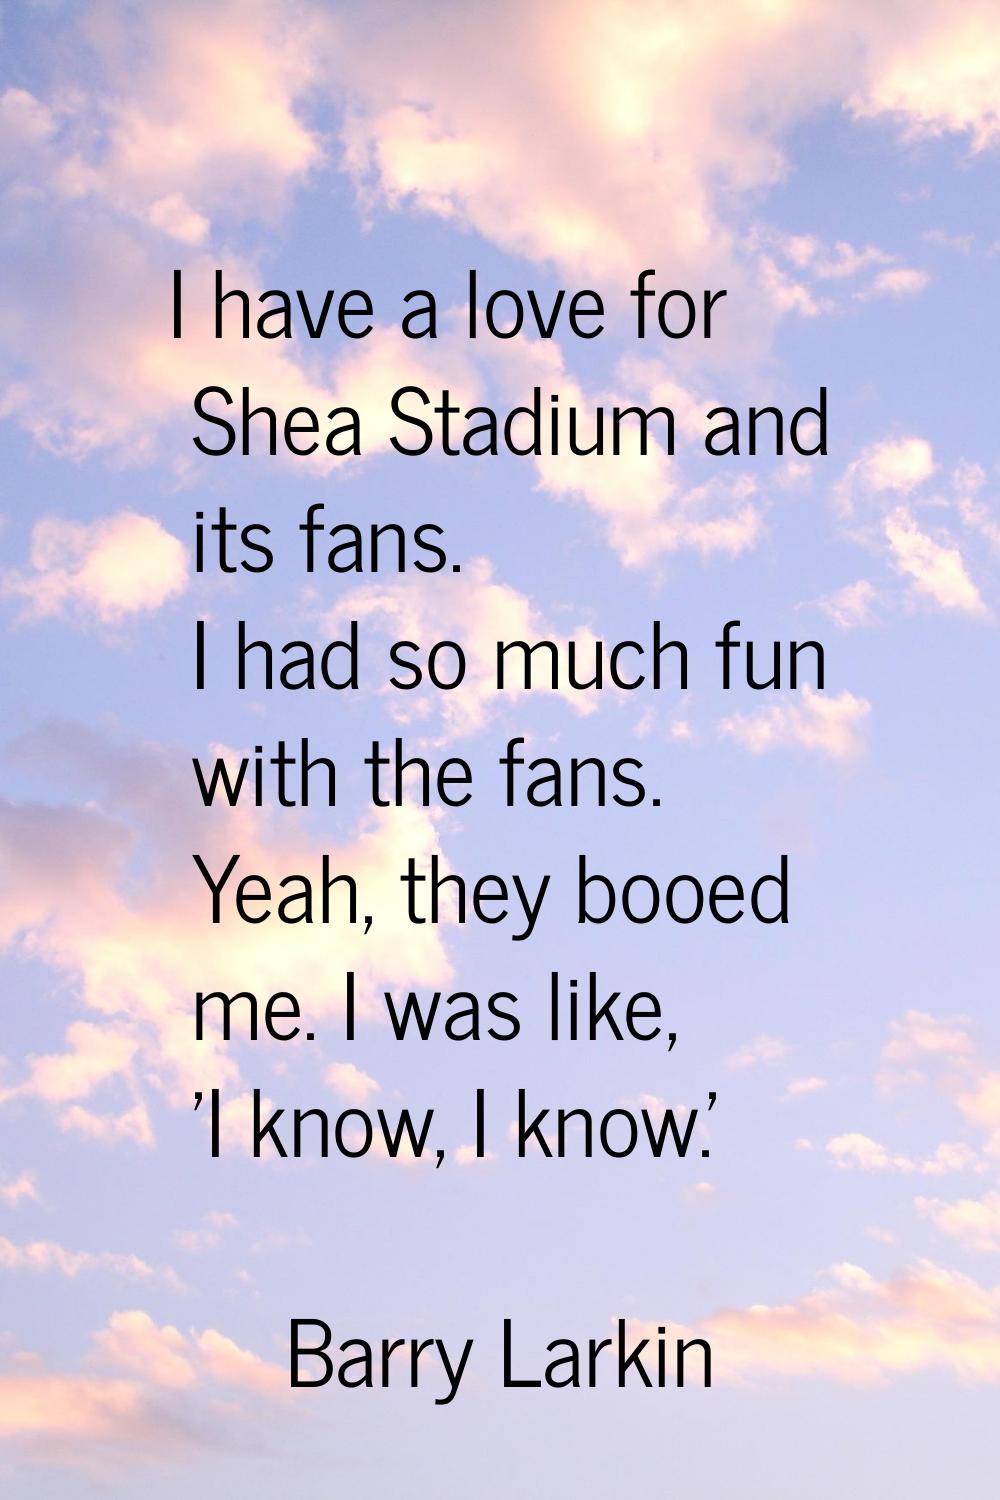 I have a love for Shea Stadium and its fans. I had so much fun with the fans. Yeah, they booed me. 